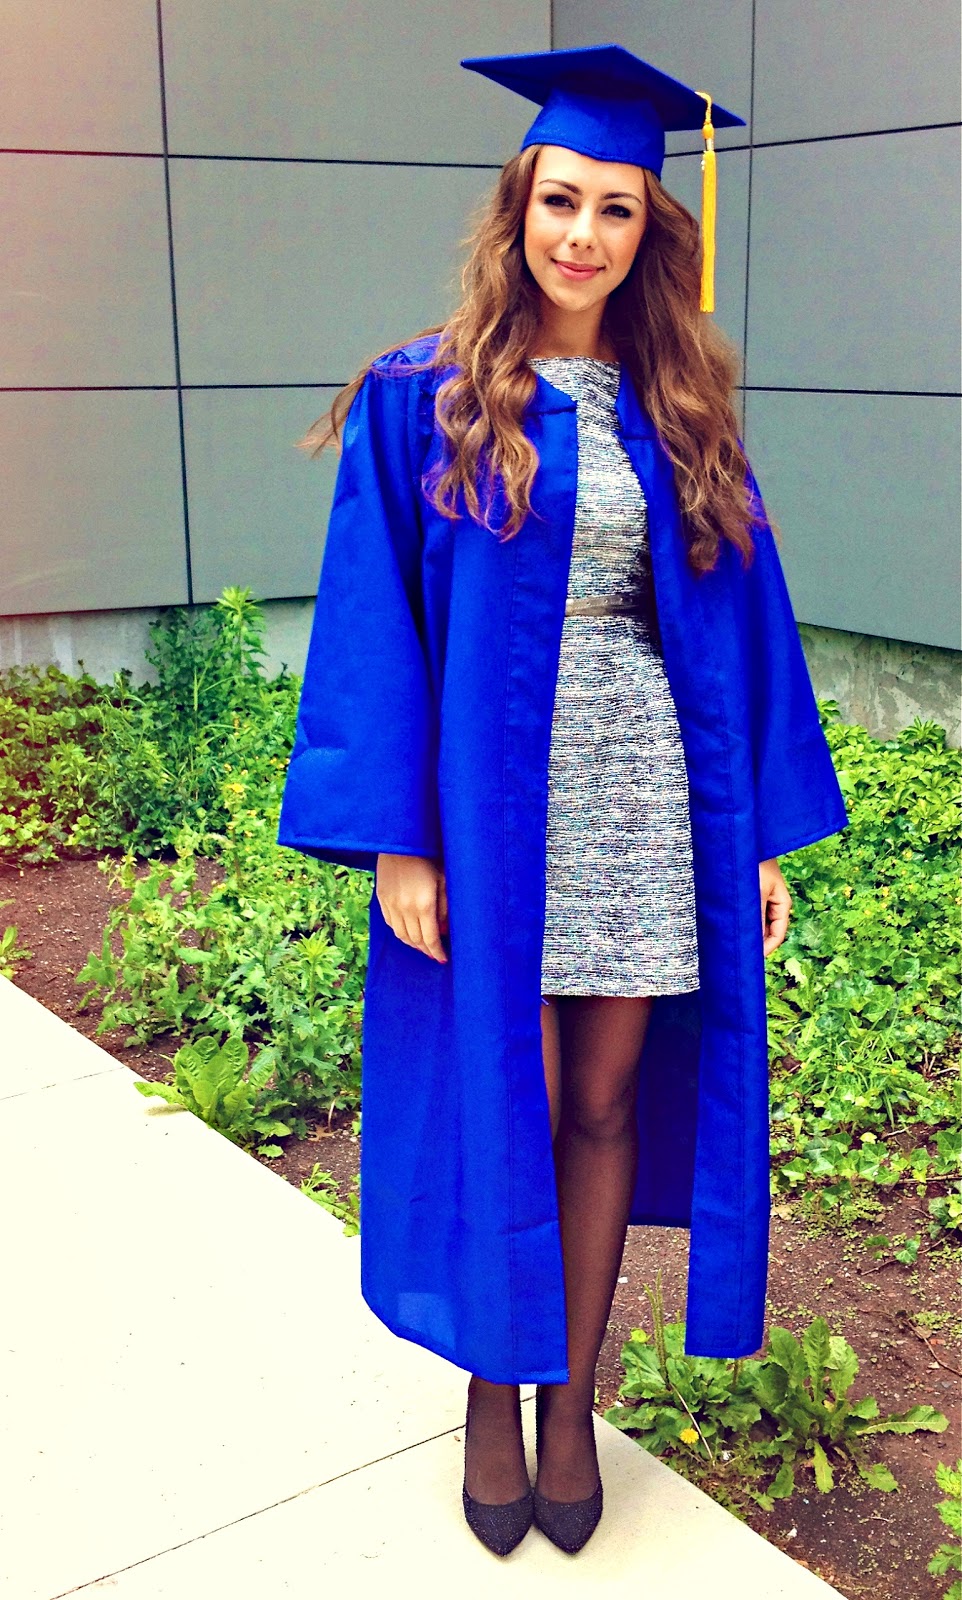 f.a.b by Deinma: Graduation outfit ideas for ladies